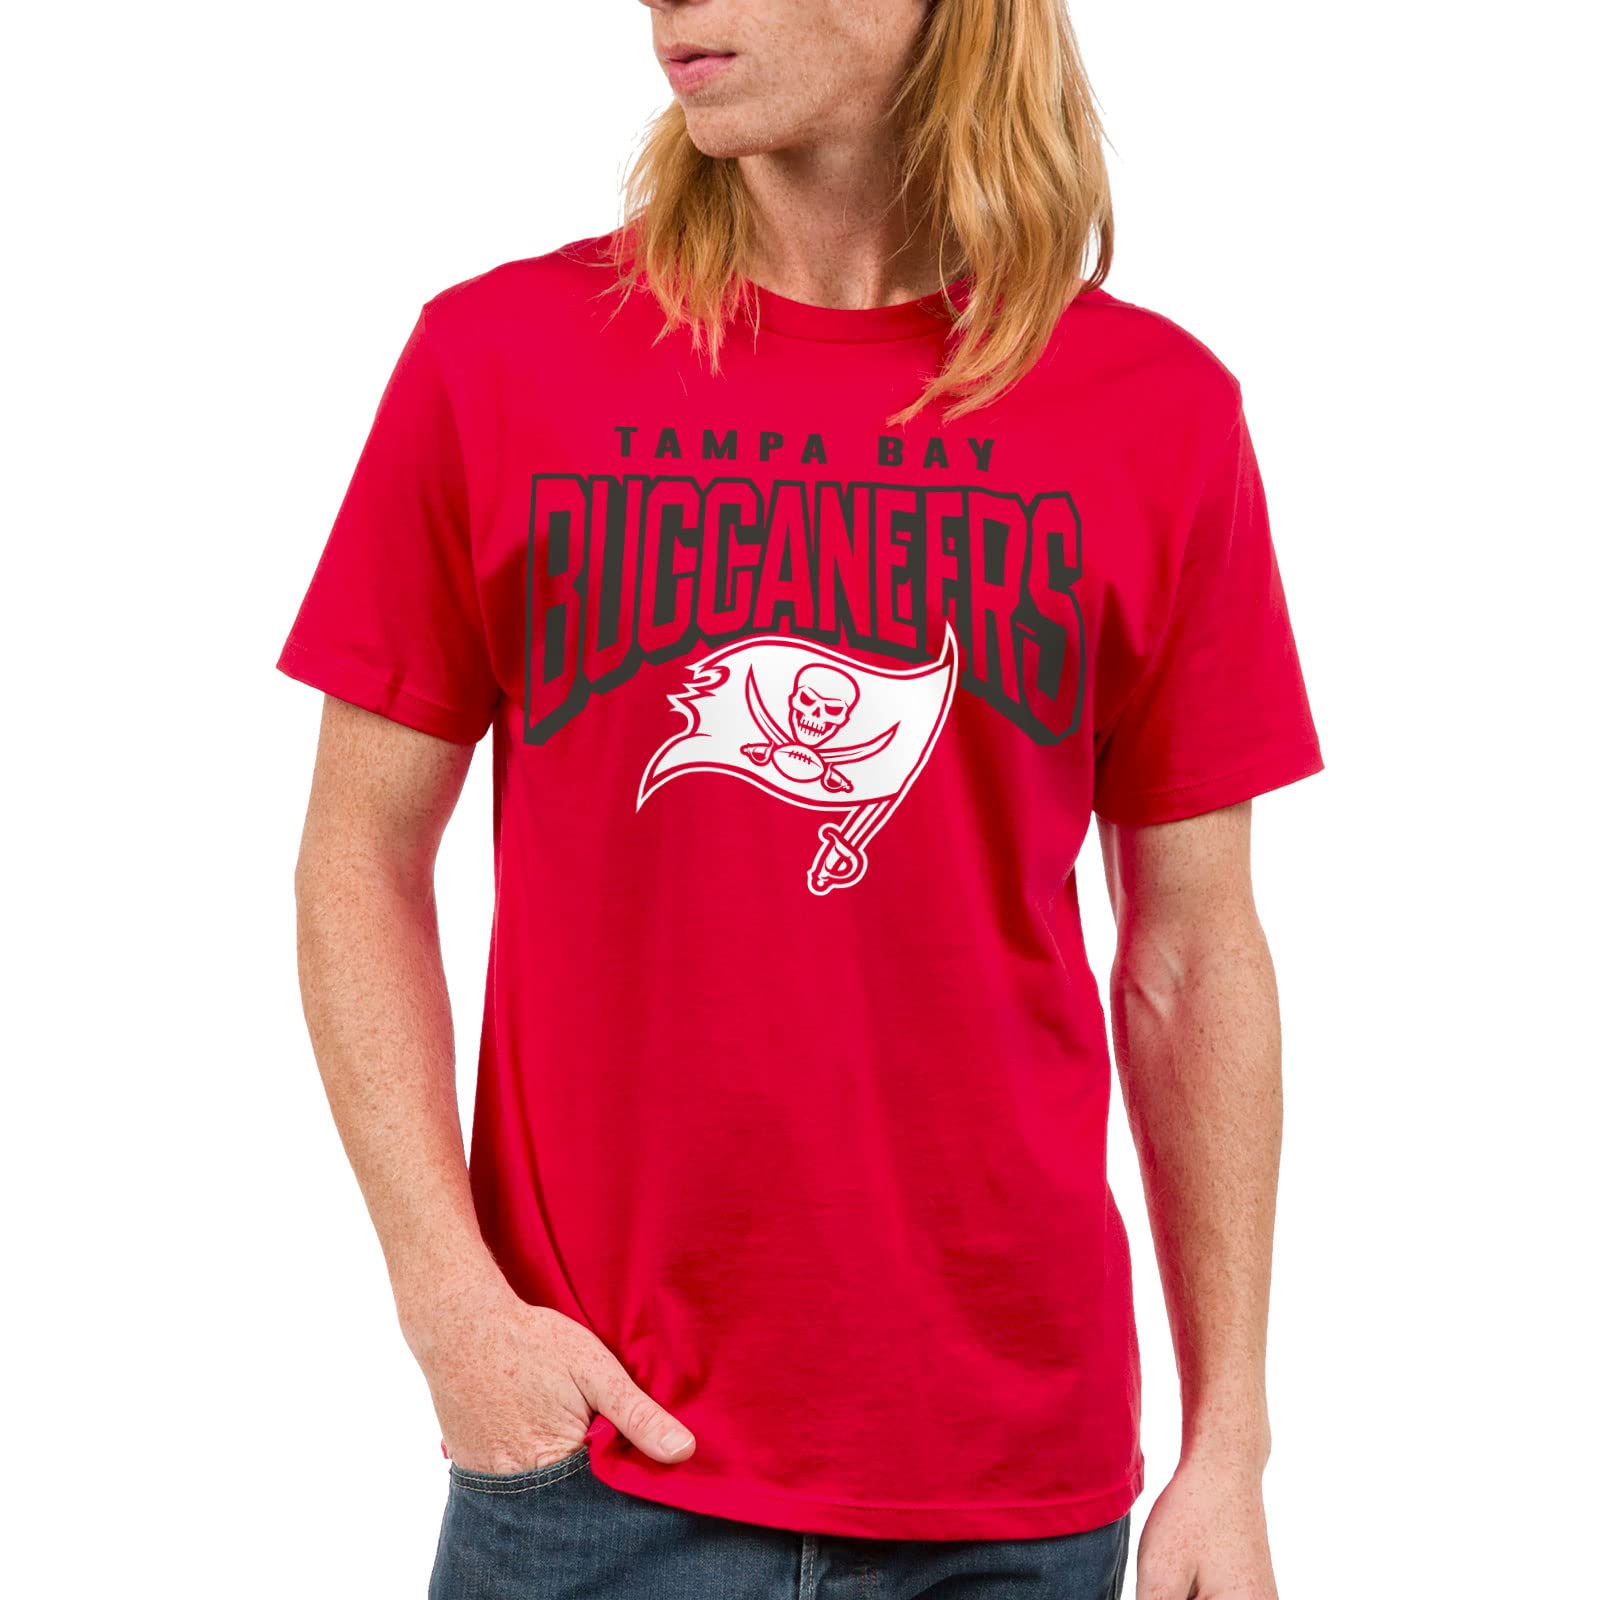 tampa bay buccaneers clothing